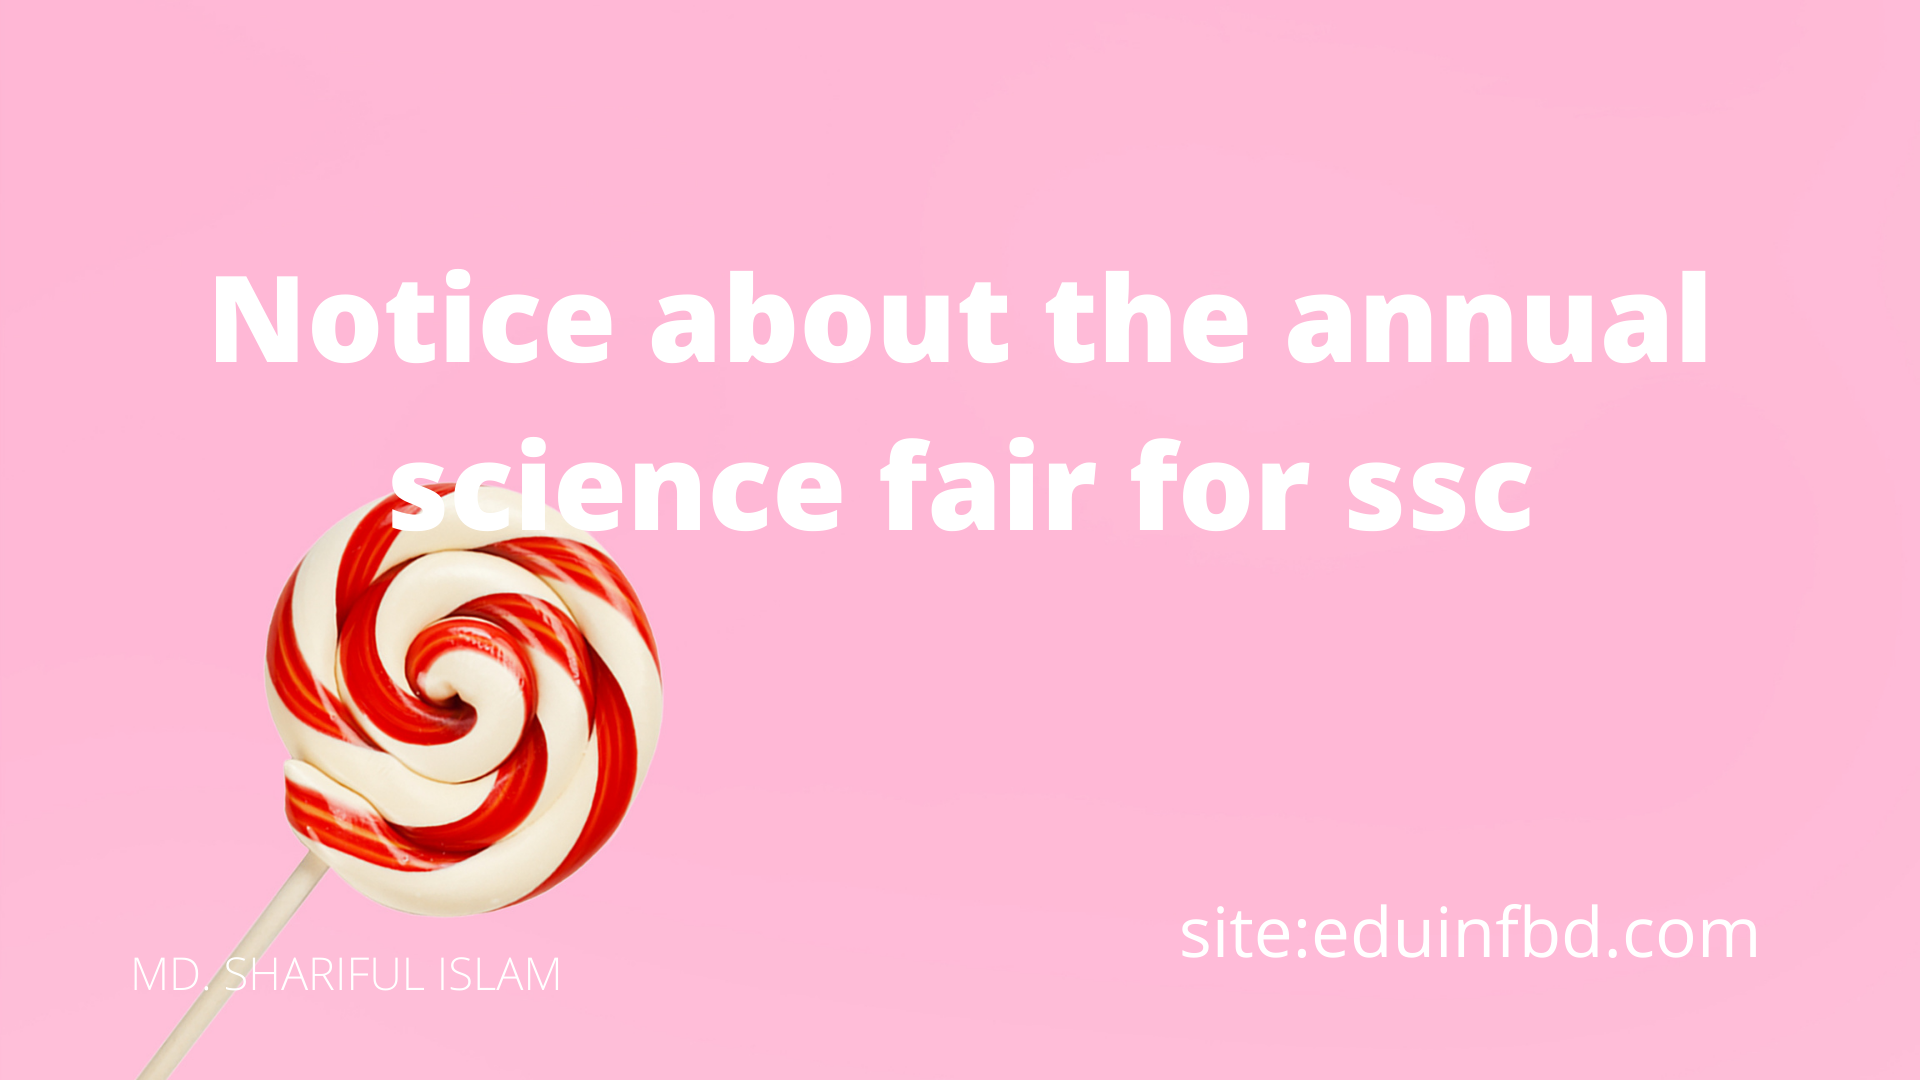 Notice about the annual science fair for ssc